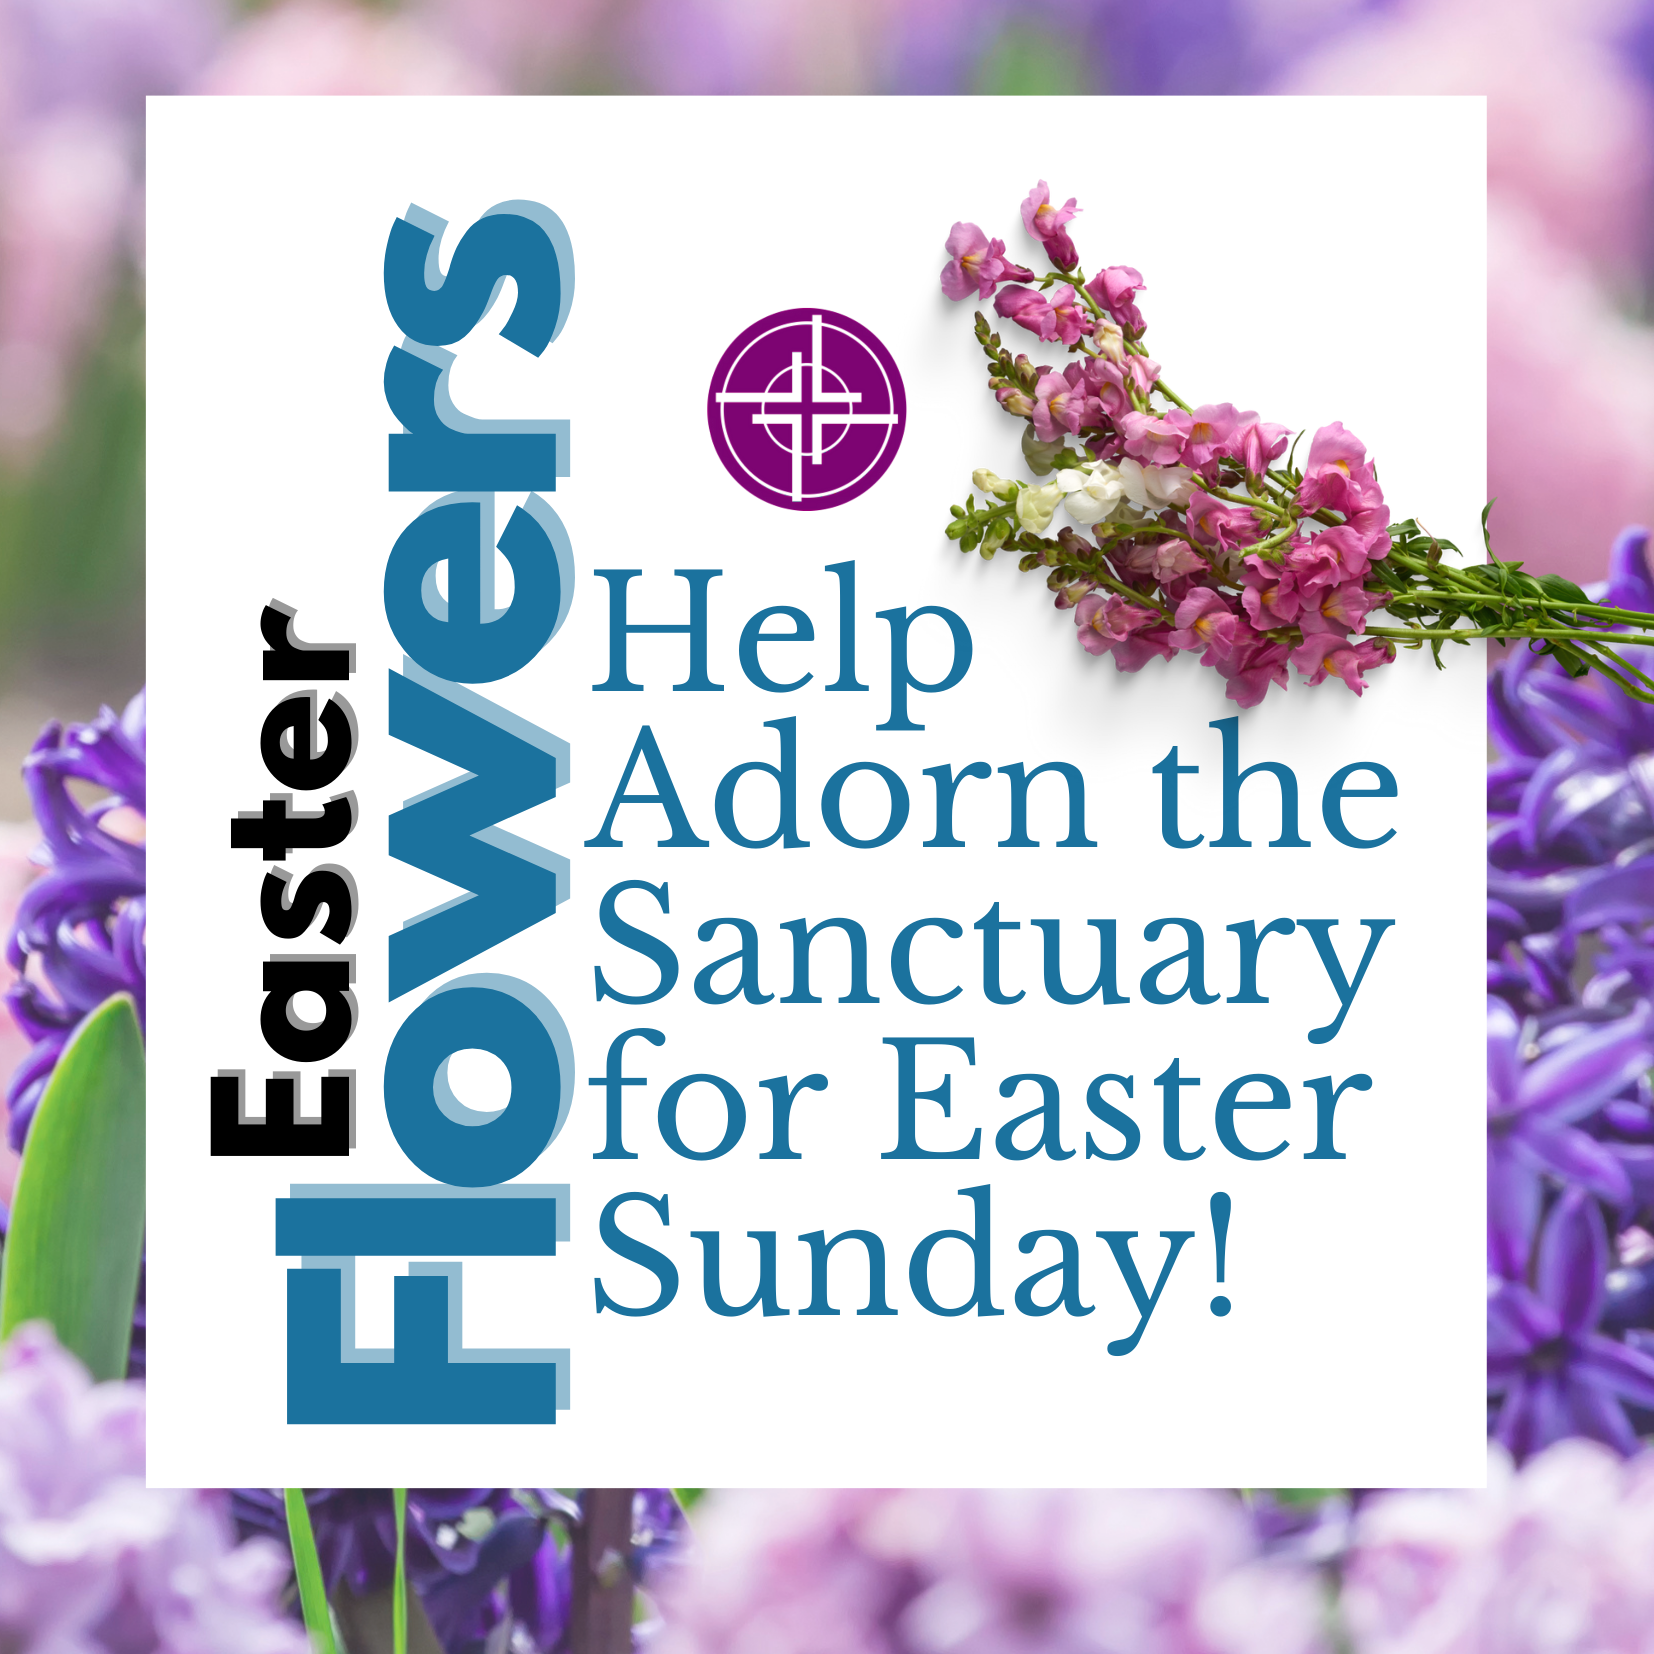 Help us adorn the Sanctuary with flowers on Easter Sunday.